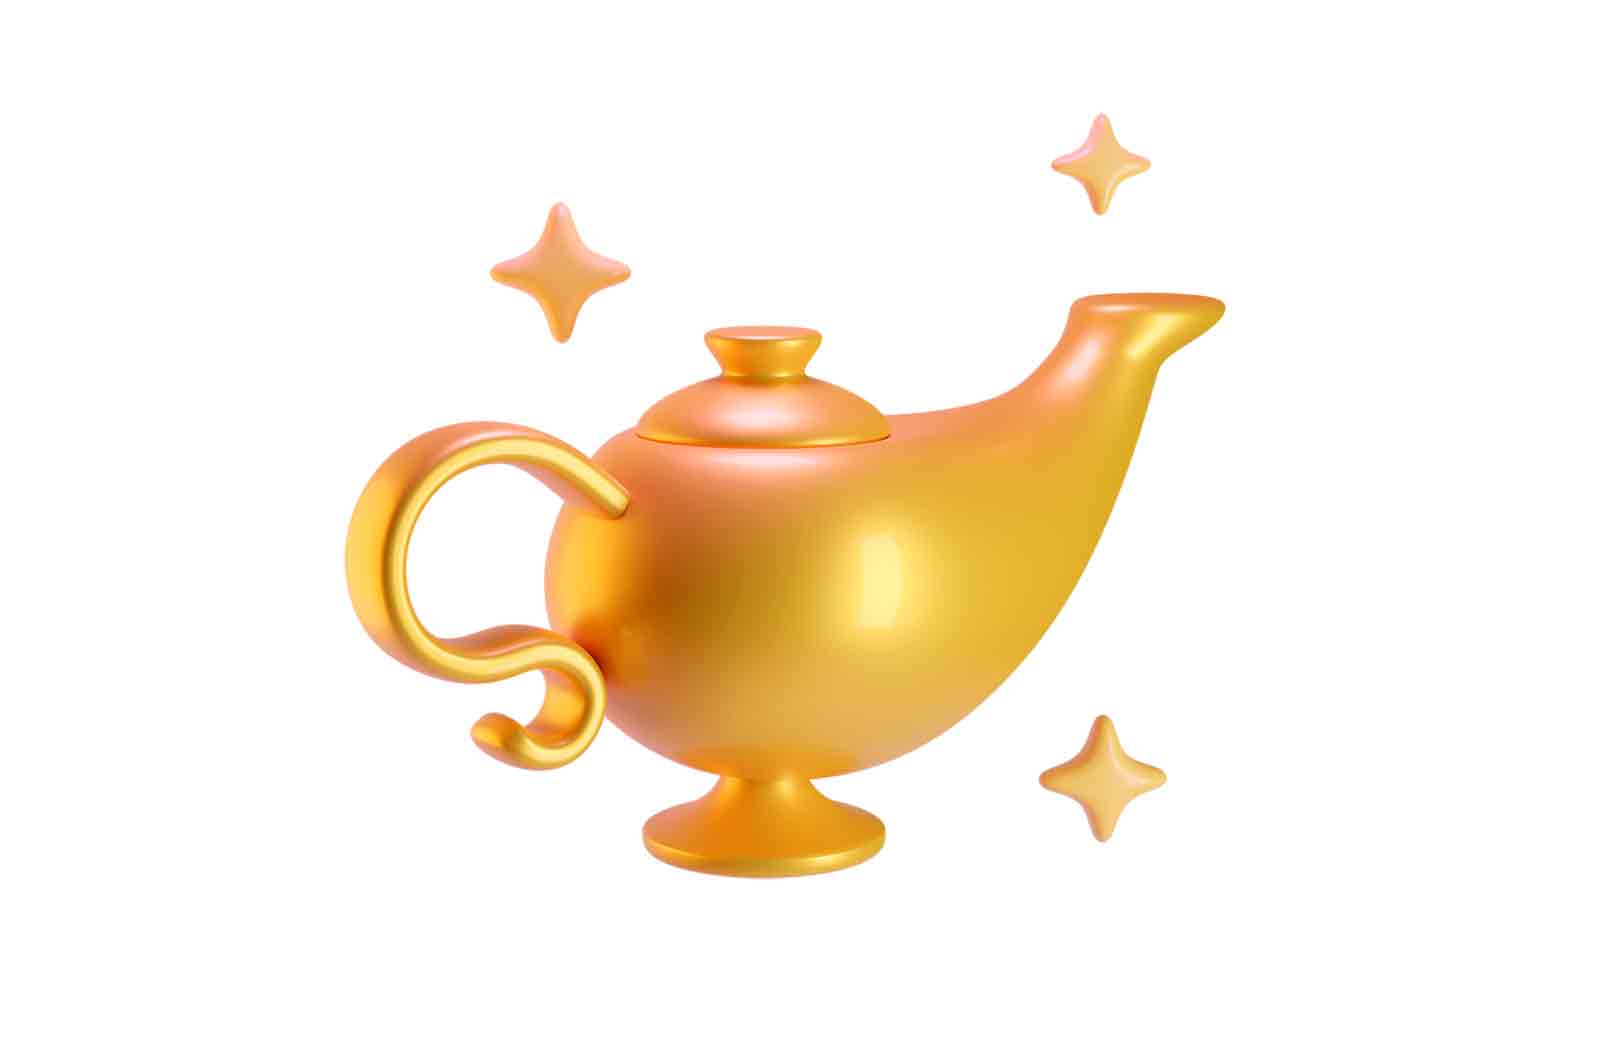 Golden genie lamp, 3D rendered illustration. A magical artifact that can grant wishes.